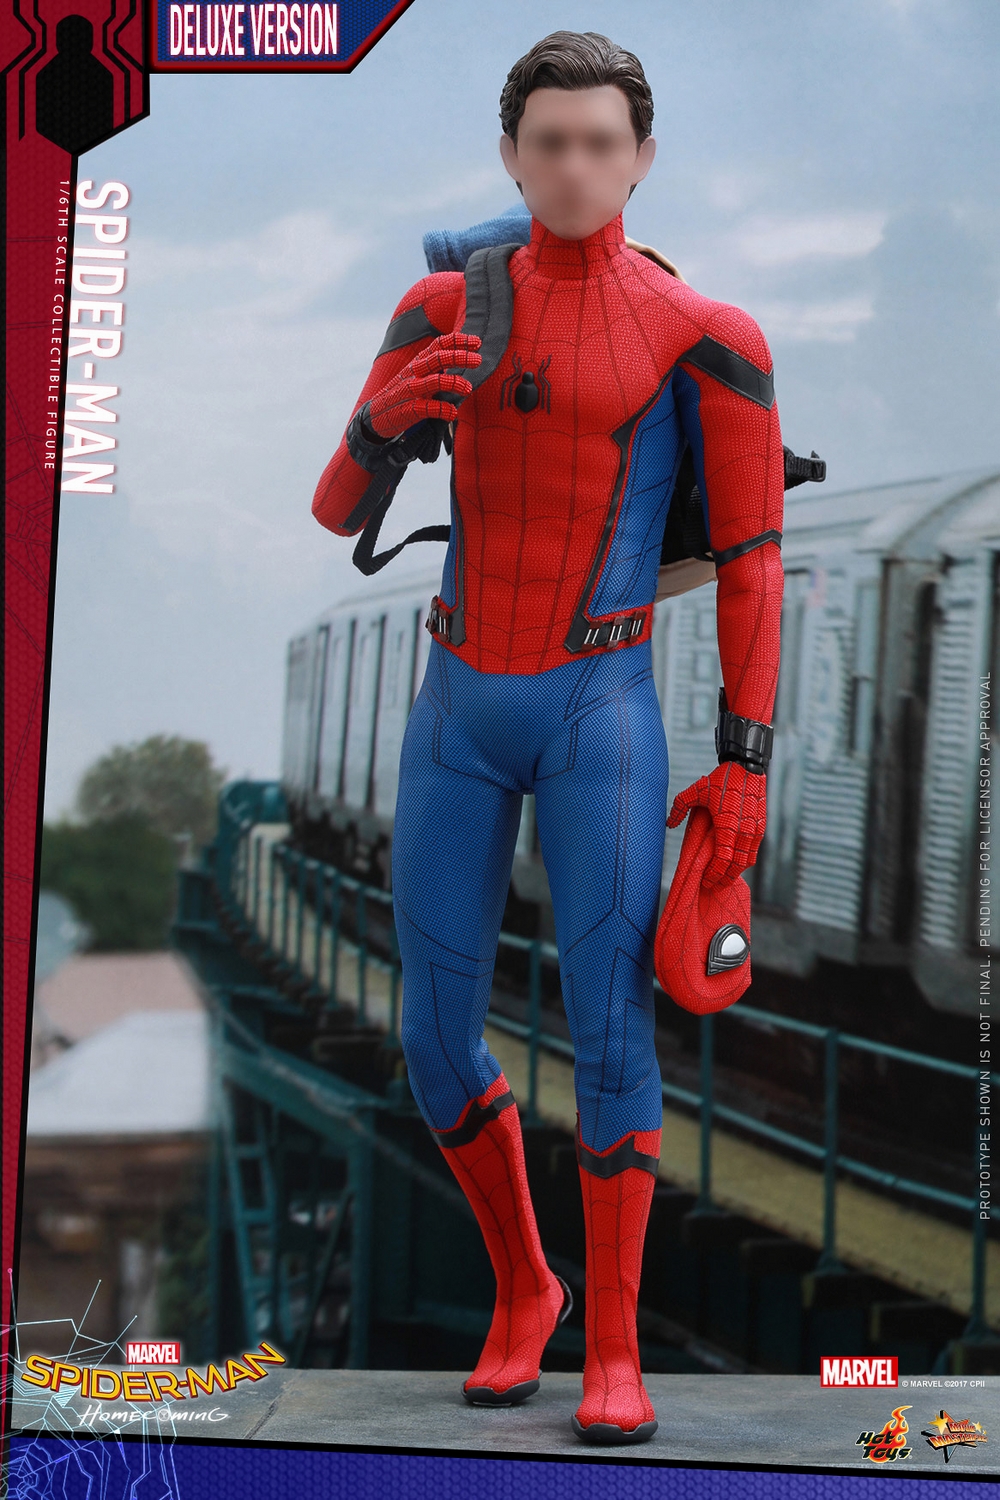 Hot-Toys-MMS426-Spider-Man-Homecoming-Deluxe-011.jpg